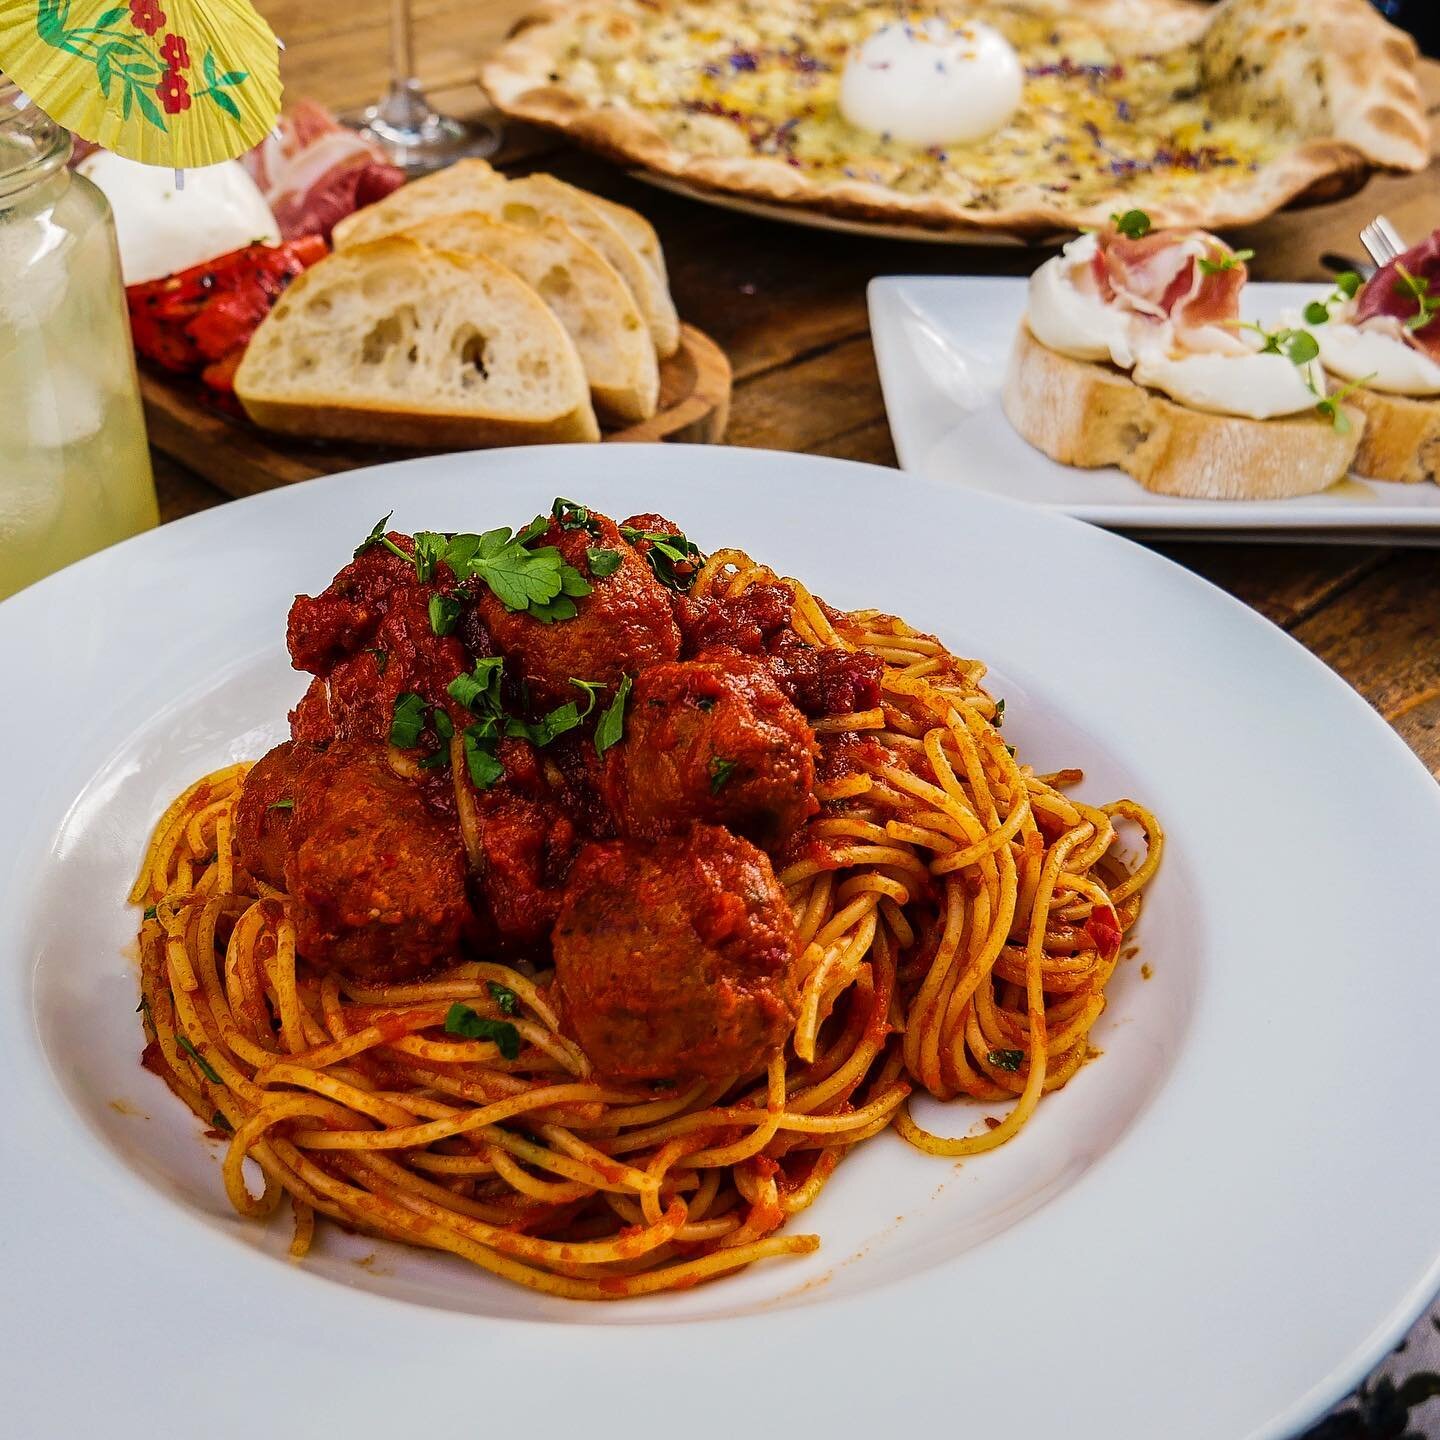 Our spaghetti Nduja meatballs!! One of our new additions to the menu to try ❤️
.
.
.
.
.

#eeeeeats #timeoutlondon #fooding #londonlife #londonfood #londonfoodie #londoneats #goingoutlondon #golondonfood #pastalover #itssolondon #pasta #meatballs #sp